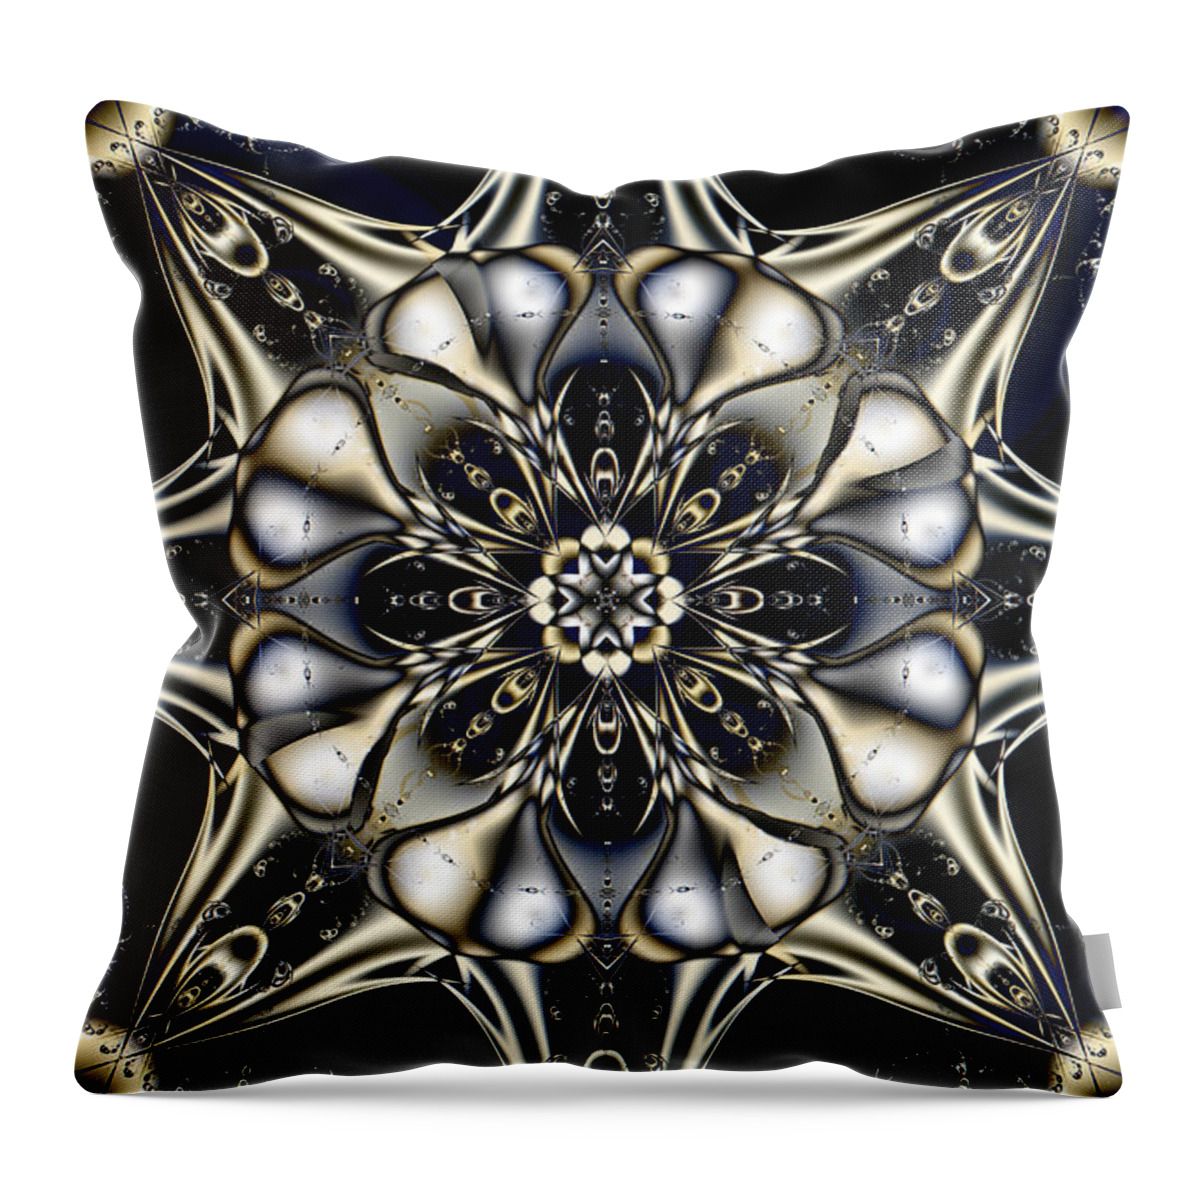 Abstract Throw Pillow featuring the digital art Blingo by Jim Pavelle